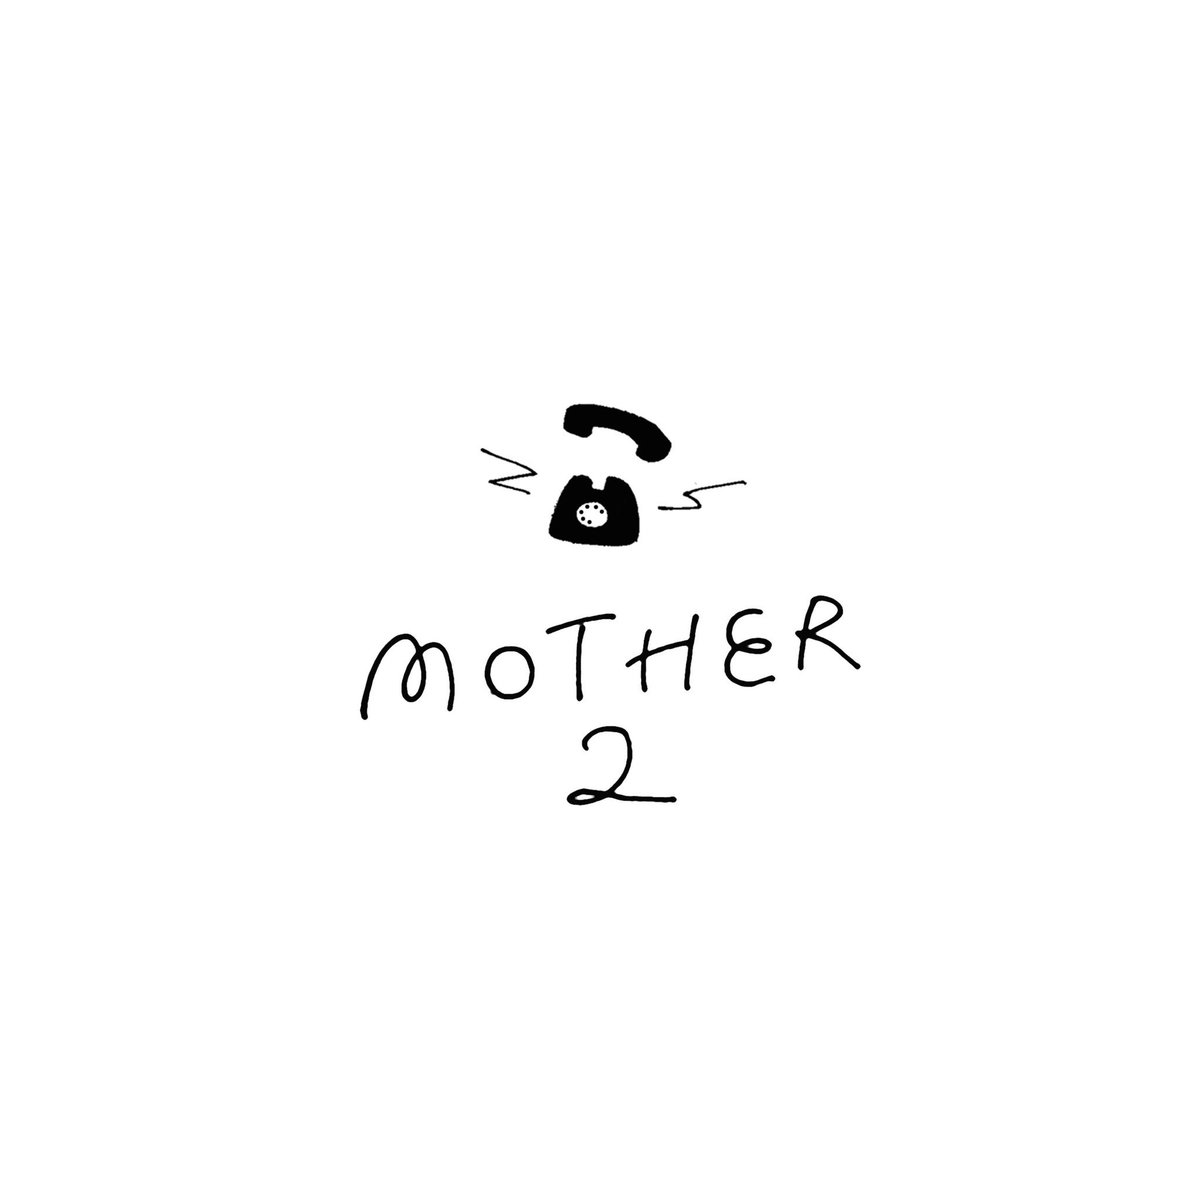 Smiles and Tears.

#MOTHER2_25th
#MOTHER2_25周年 

25周年おめでとうございます。 